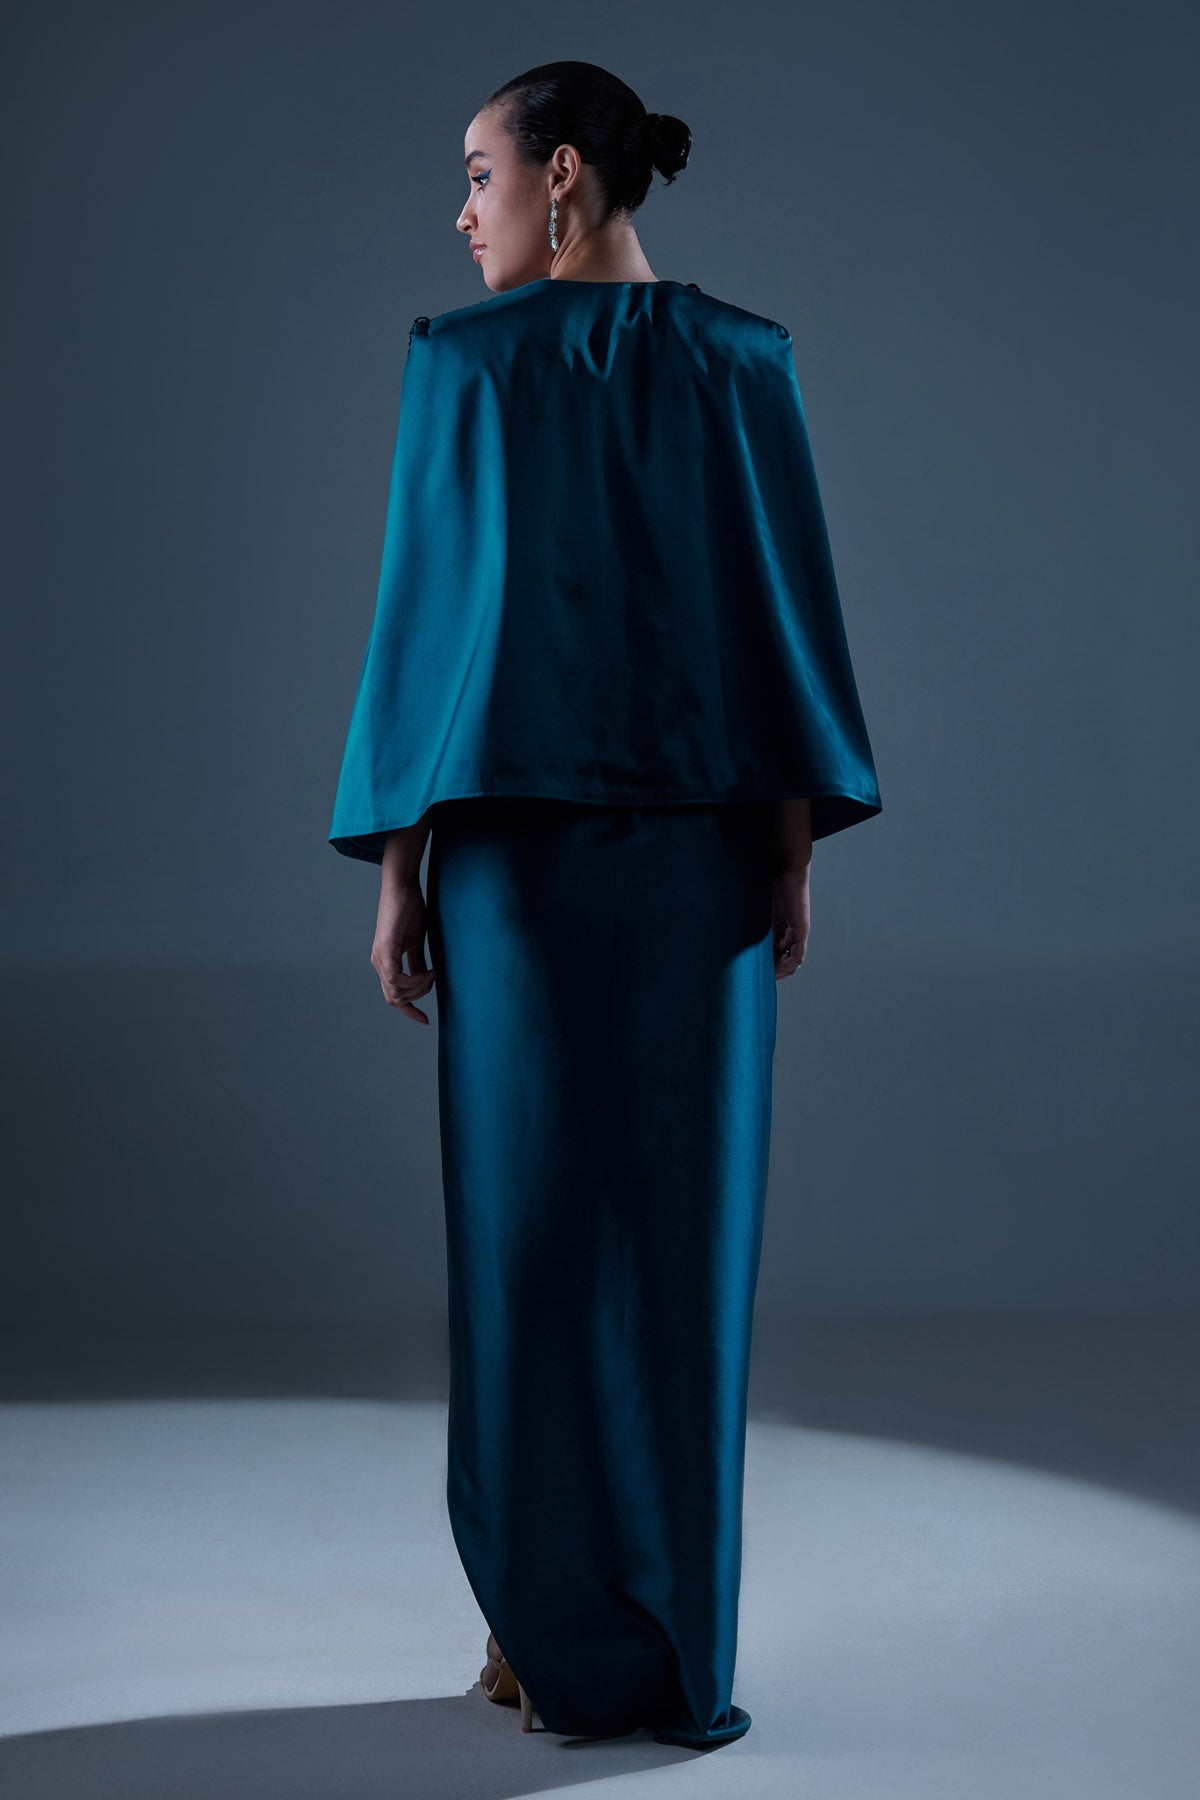 Crystal Teal Drape Gown With Cape